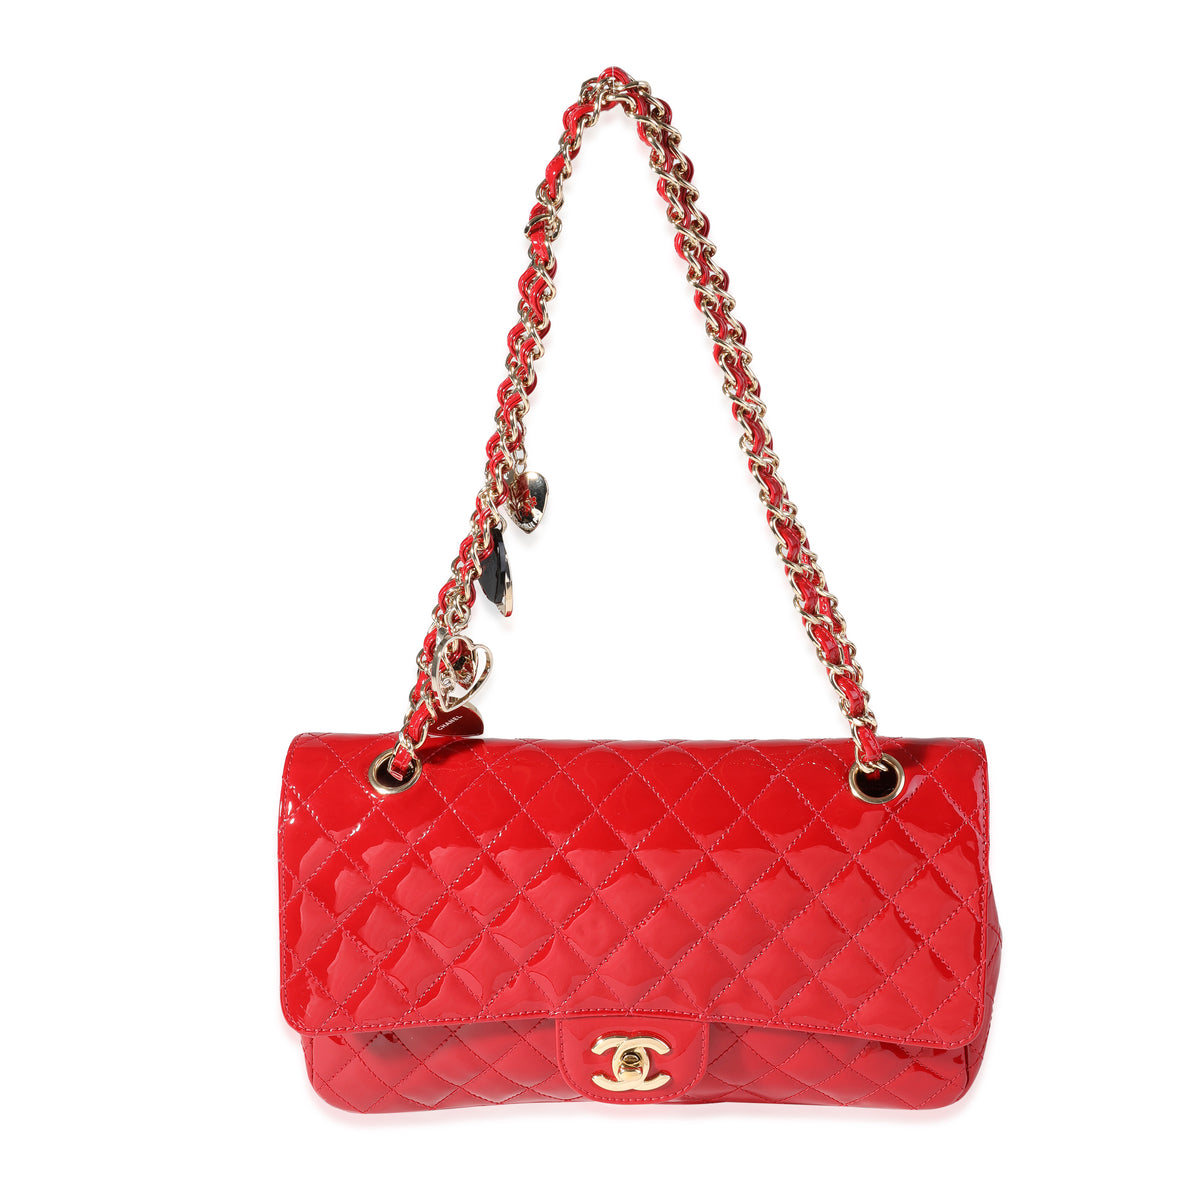 Chanel Red Quilted Patent Leather Valentine's Day Medium Single Flap Bag